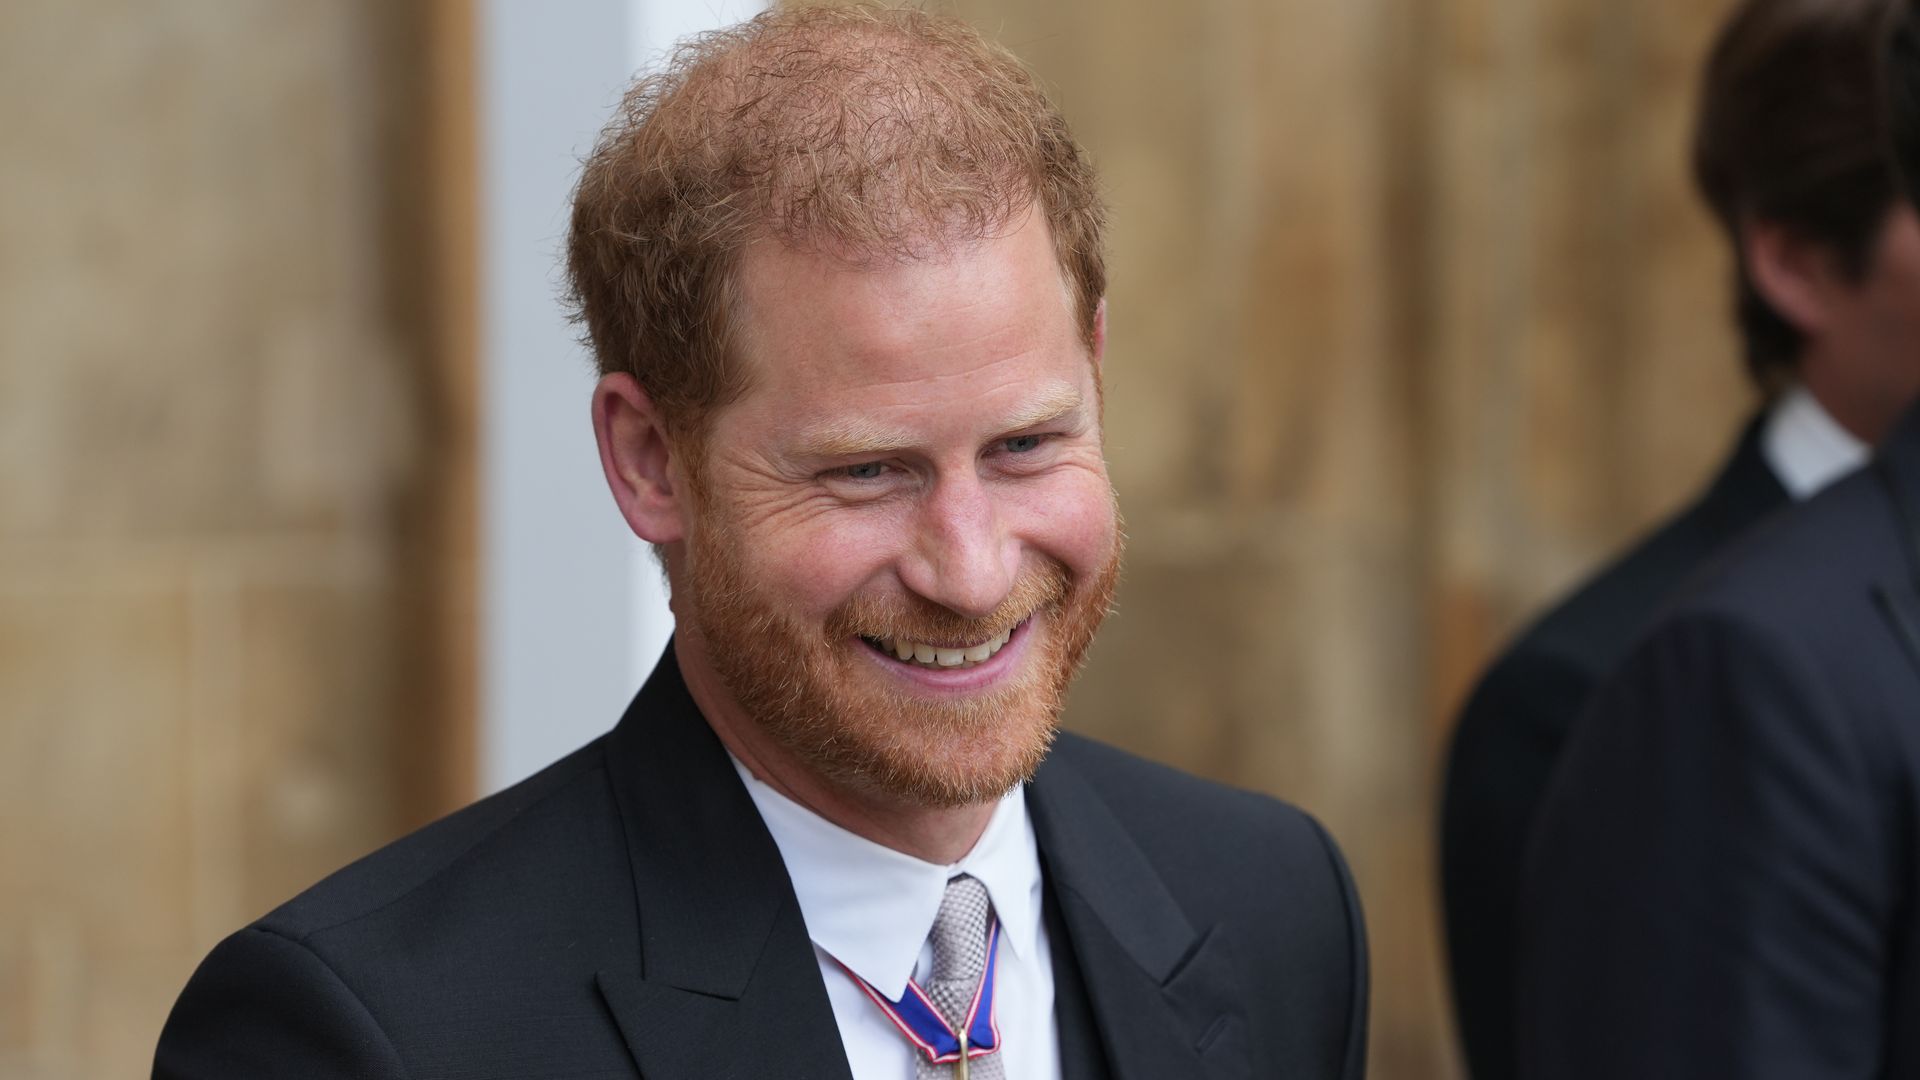 Prince Harry loudly cheered by veterans in San Diego amid ongoing legal ...